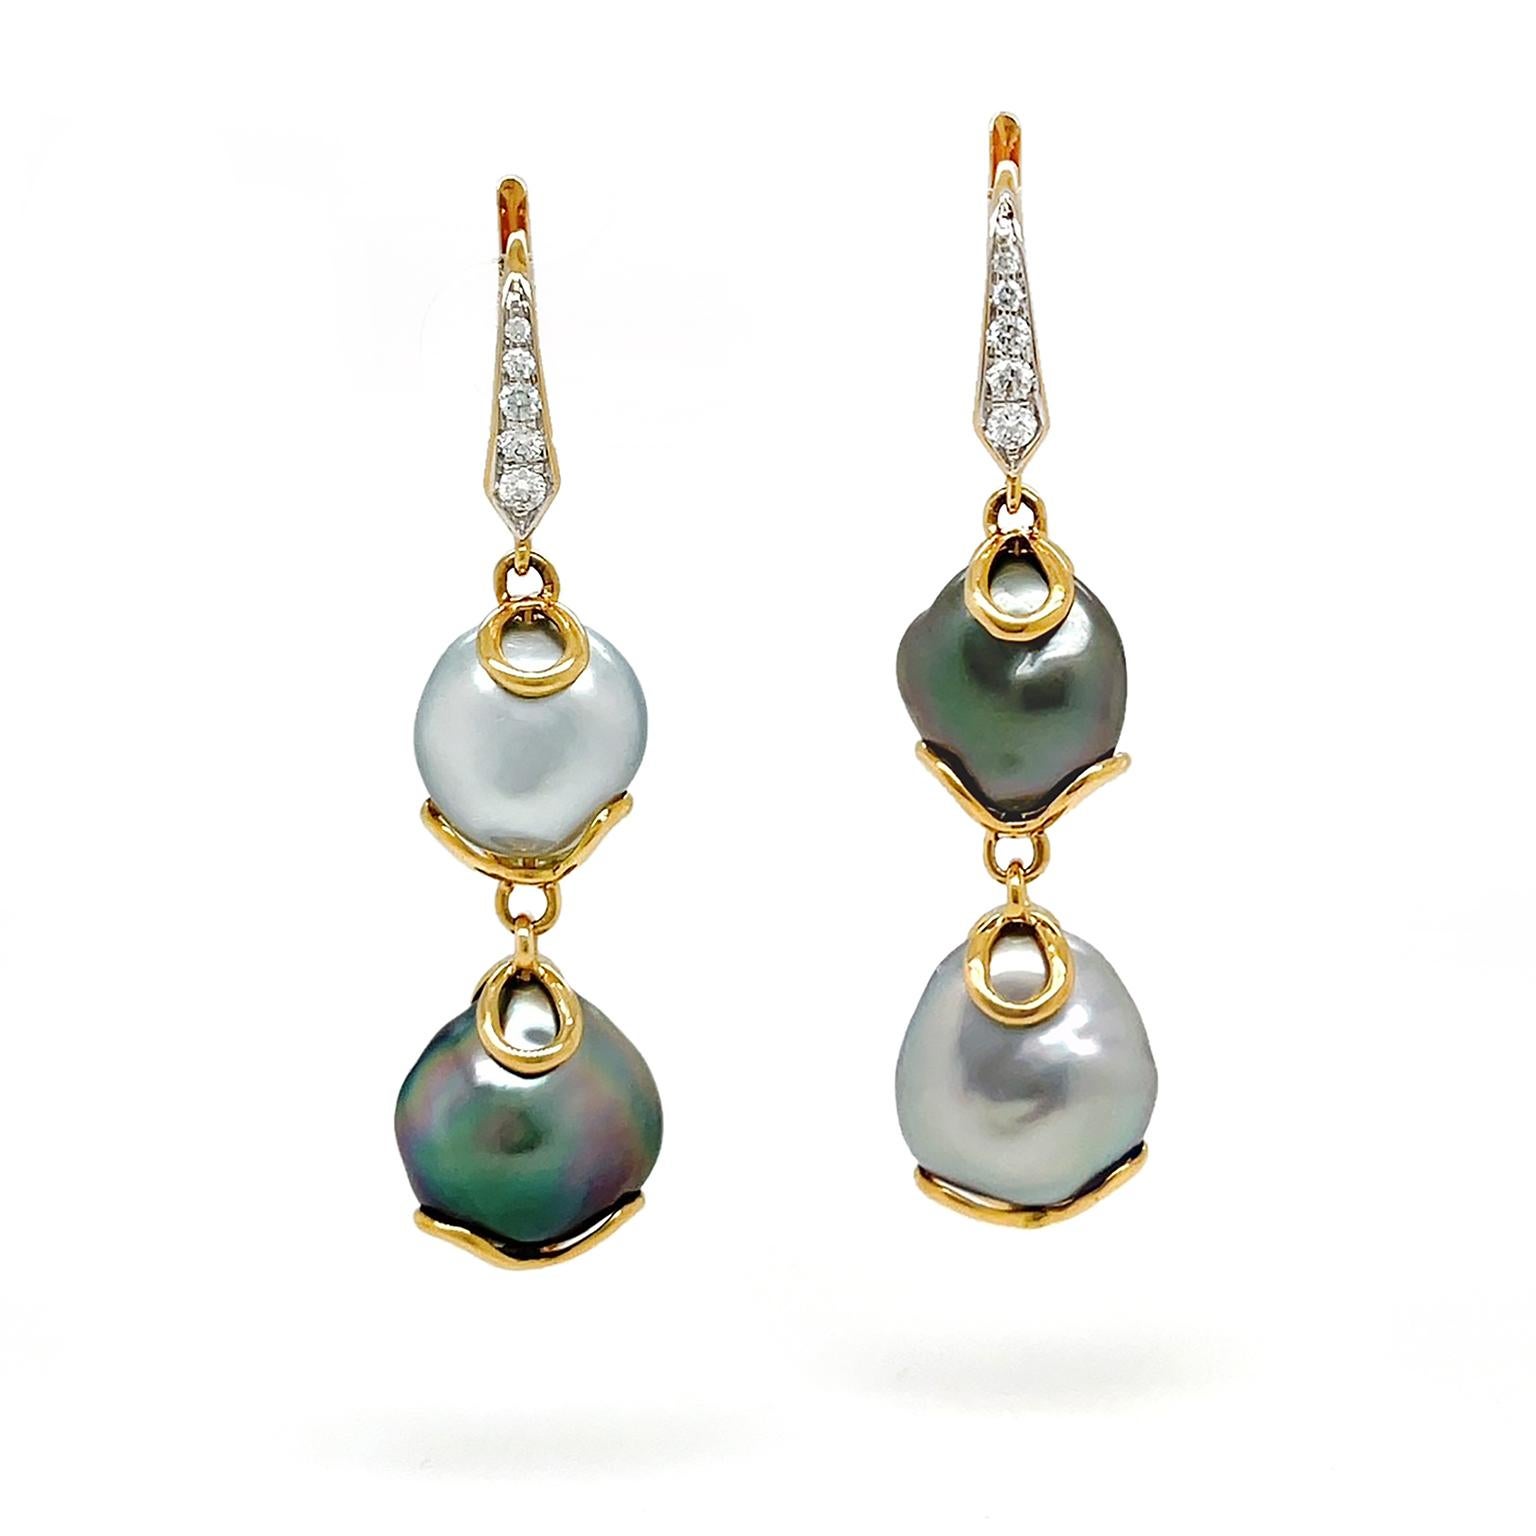 Luster and light are emitted by these drop earrings. 18k yellow gold lever backs pave set with brilliant cut diamonds lead to a baroque Keshi pearl in gray, with its prized iridescence, cradled between a pair of gold loops. This follows with an